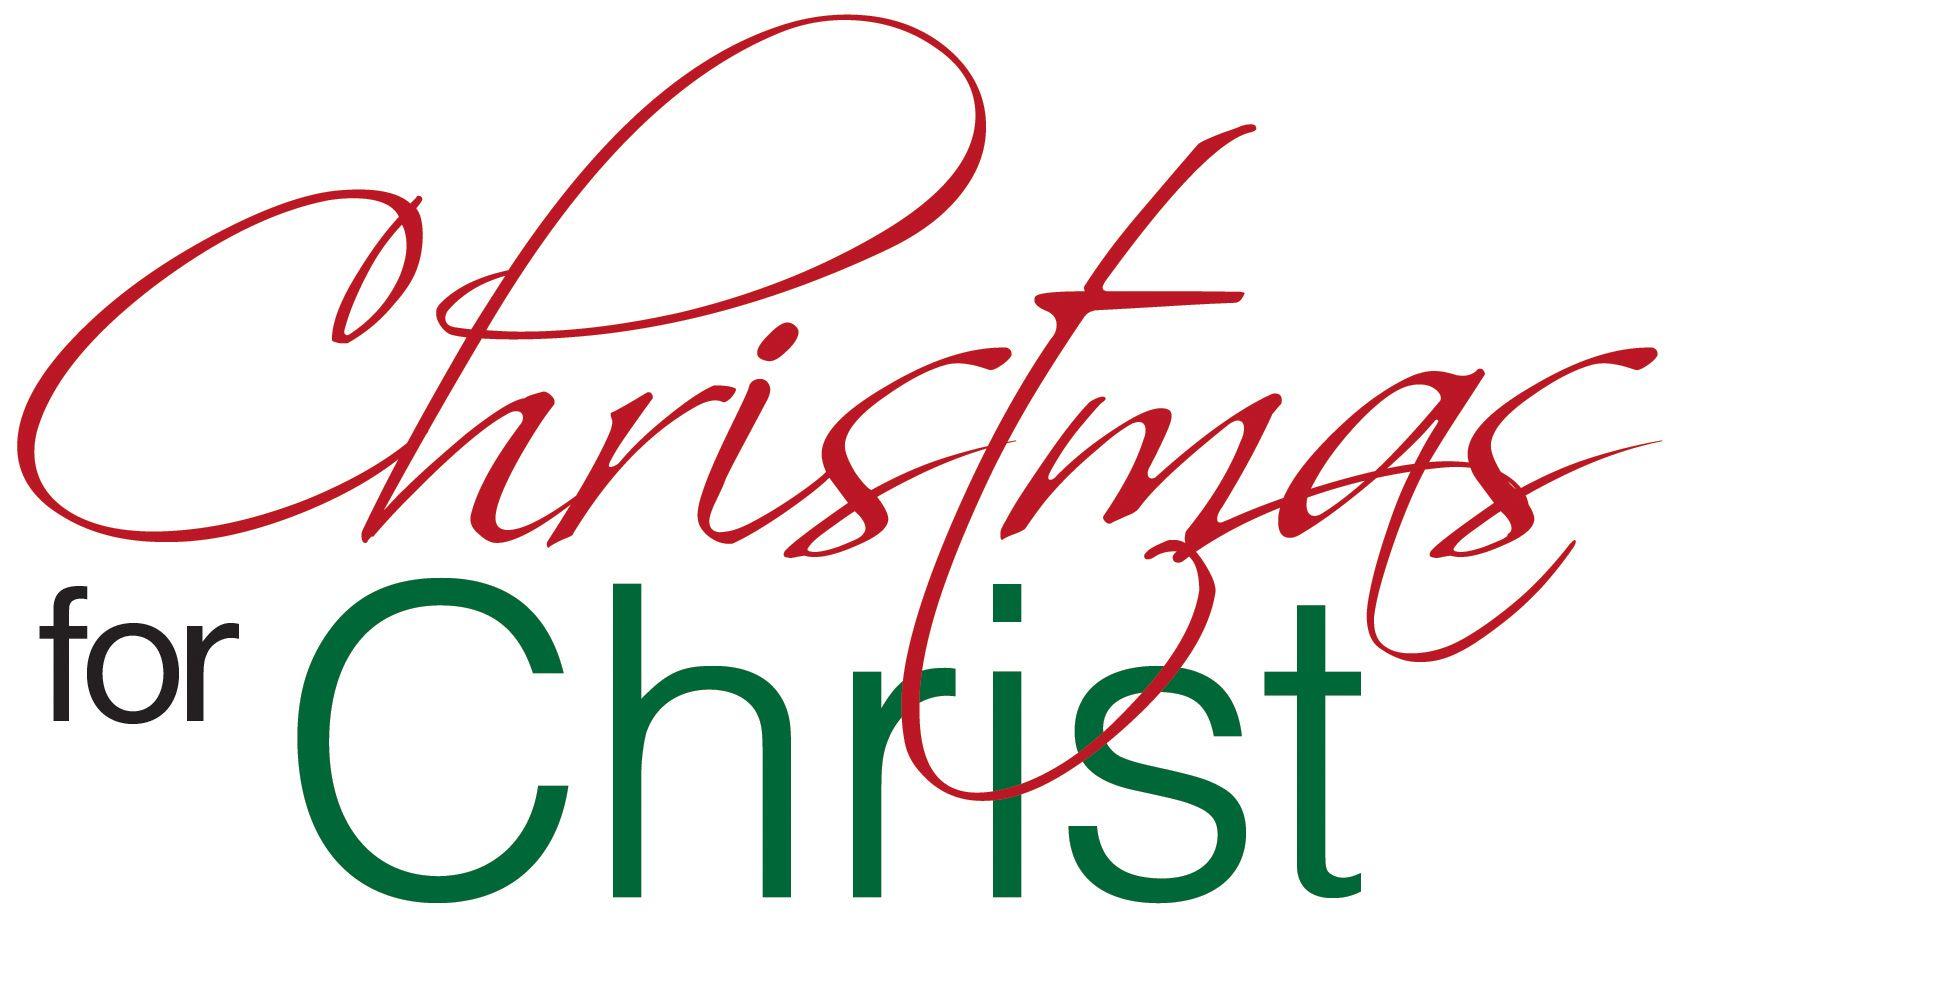 Christian Christmas Logo - Free Sacred Christmas Cliparts, Download Free Clip Art, Free Clip ...